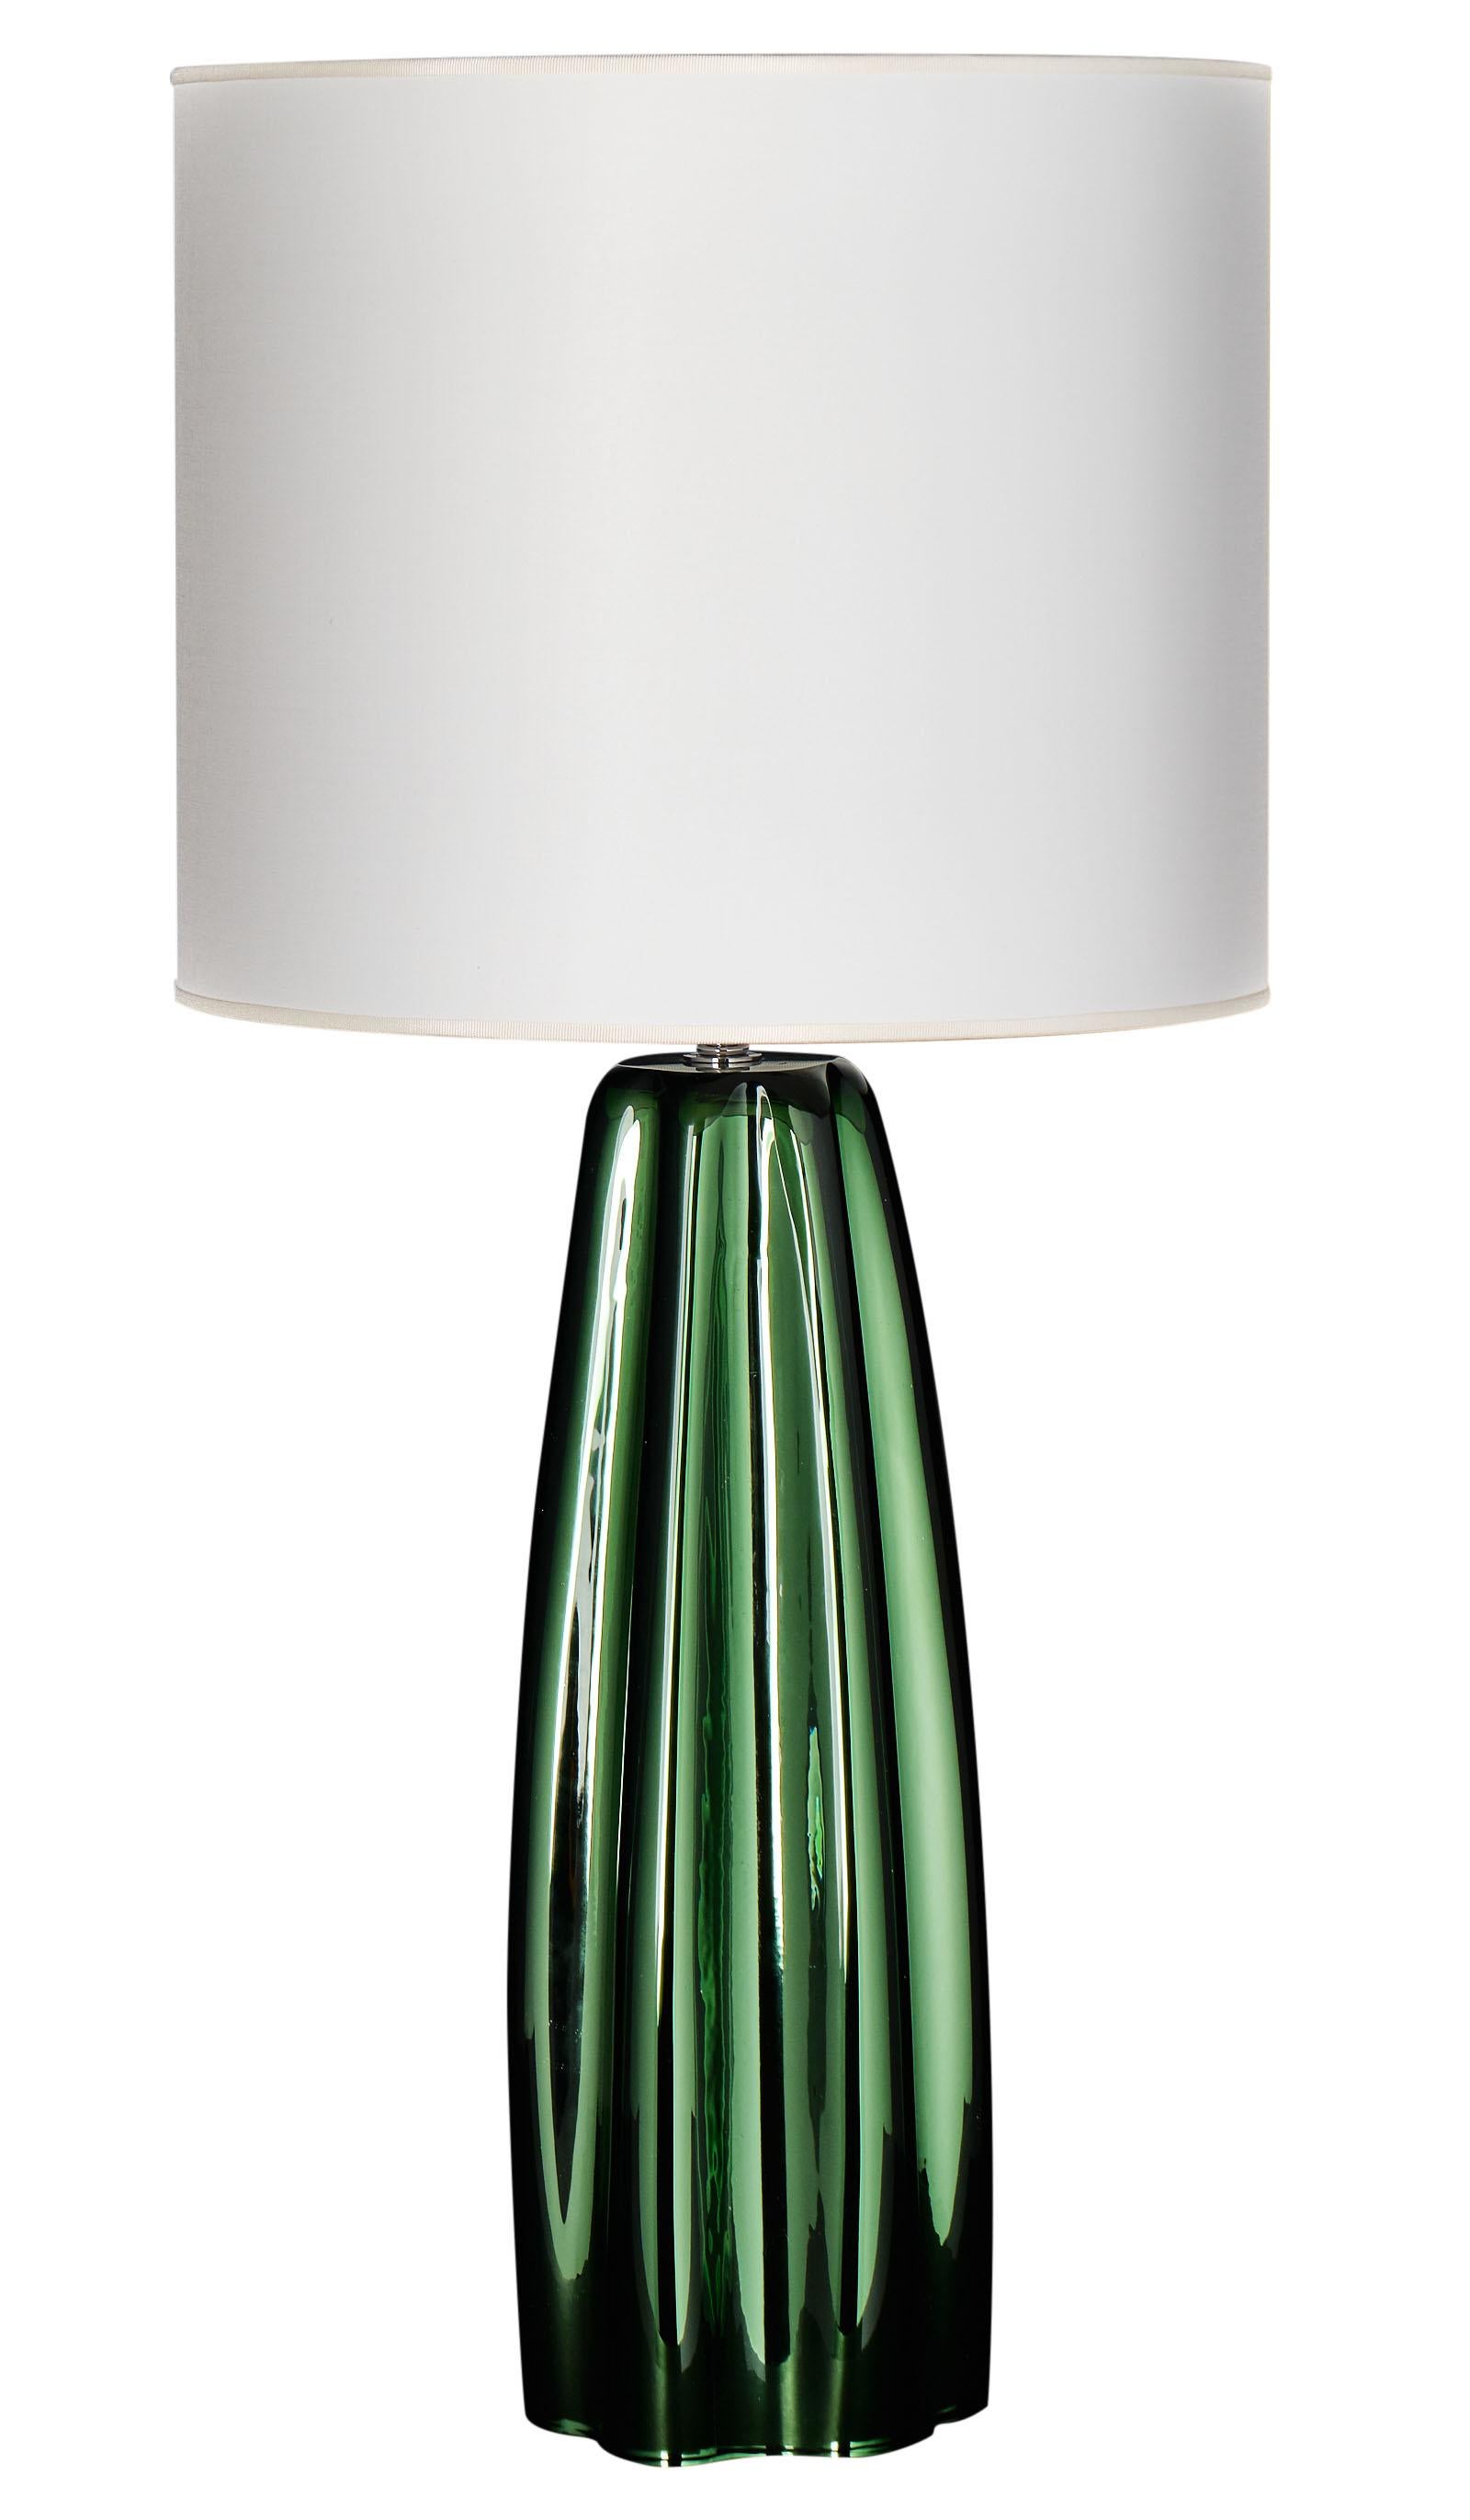 Mirrored green Murano glass lamps signed by glass maestro Alberto Dona. This beautiful pair is a lovely fern green in color, and we love the metallic affect. They have been newly wired to fit US standards. The height listed is with the shade, the